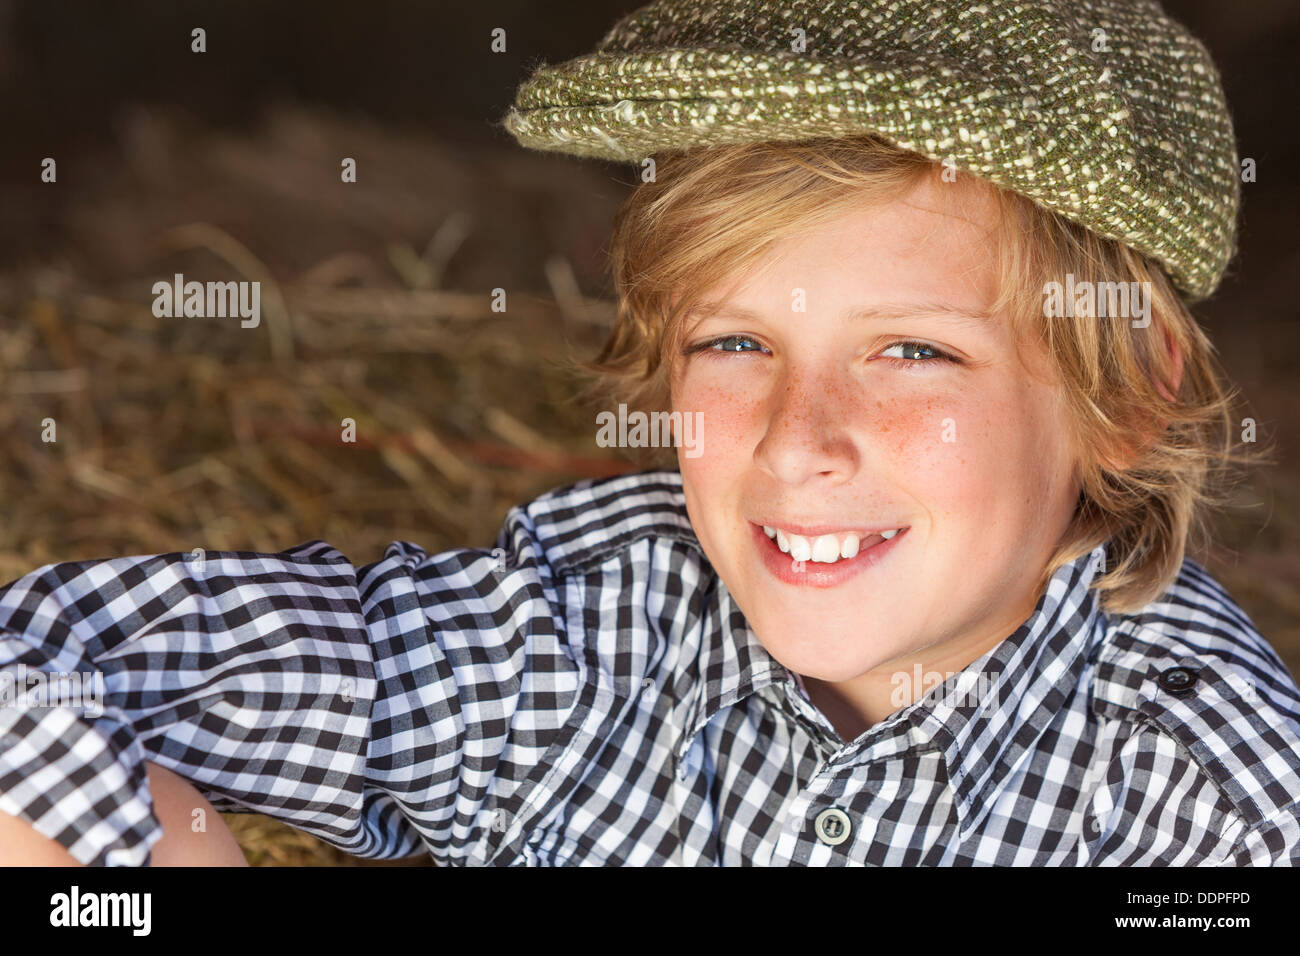 Young happy smiling blond boy child aged twelve or early teenager wearing  plaid shirt & flat cap sitting on hay or straw bales Stock Photo